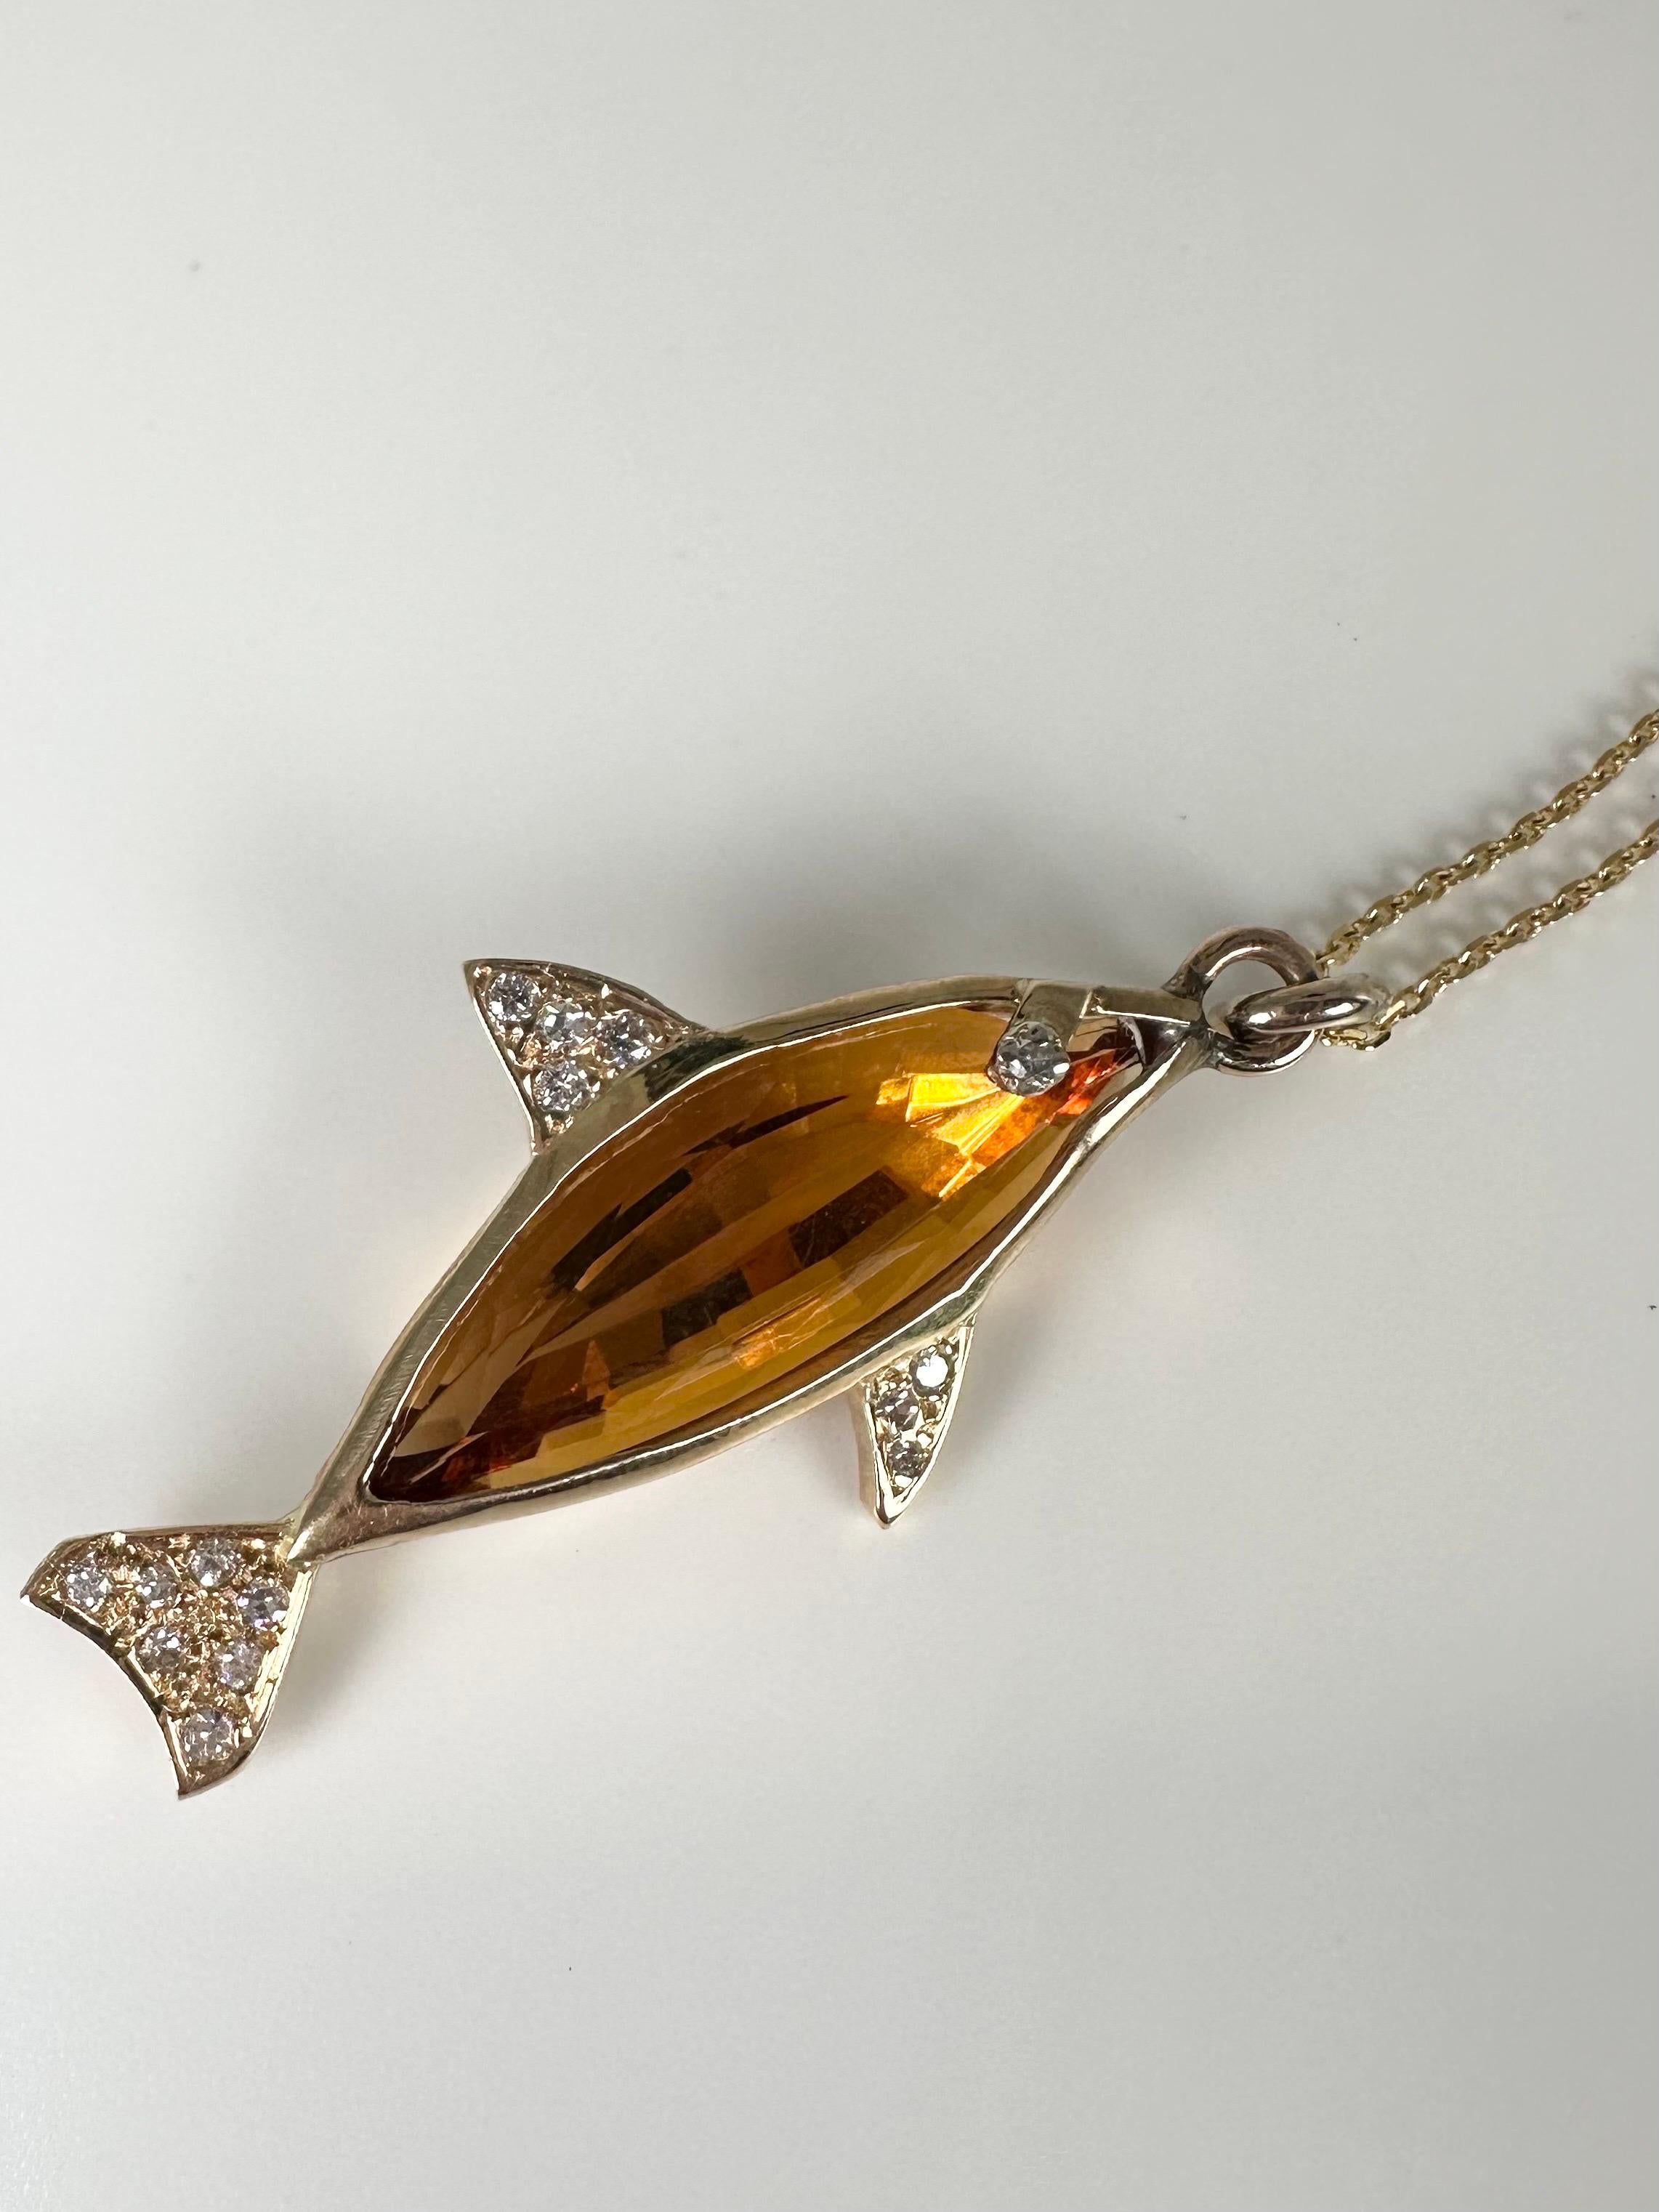 A fishers dream necklace, made with a natural citrine custom cut for the creation of this pendant, citrine of the most desired color called cognac its stunning orange with a hint of wood color. The pendant is made in 14KT yellow gold, 18